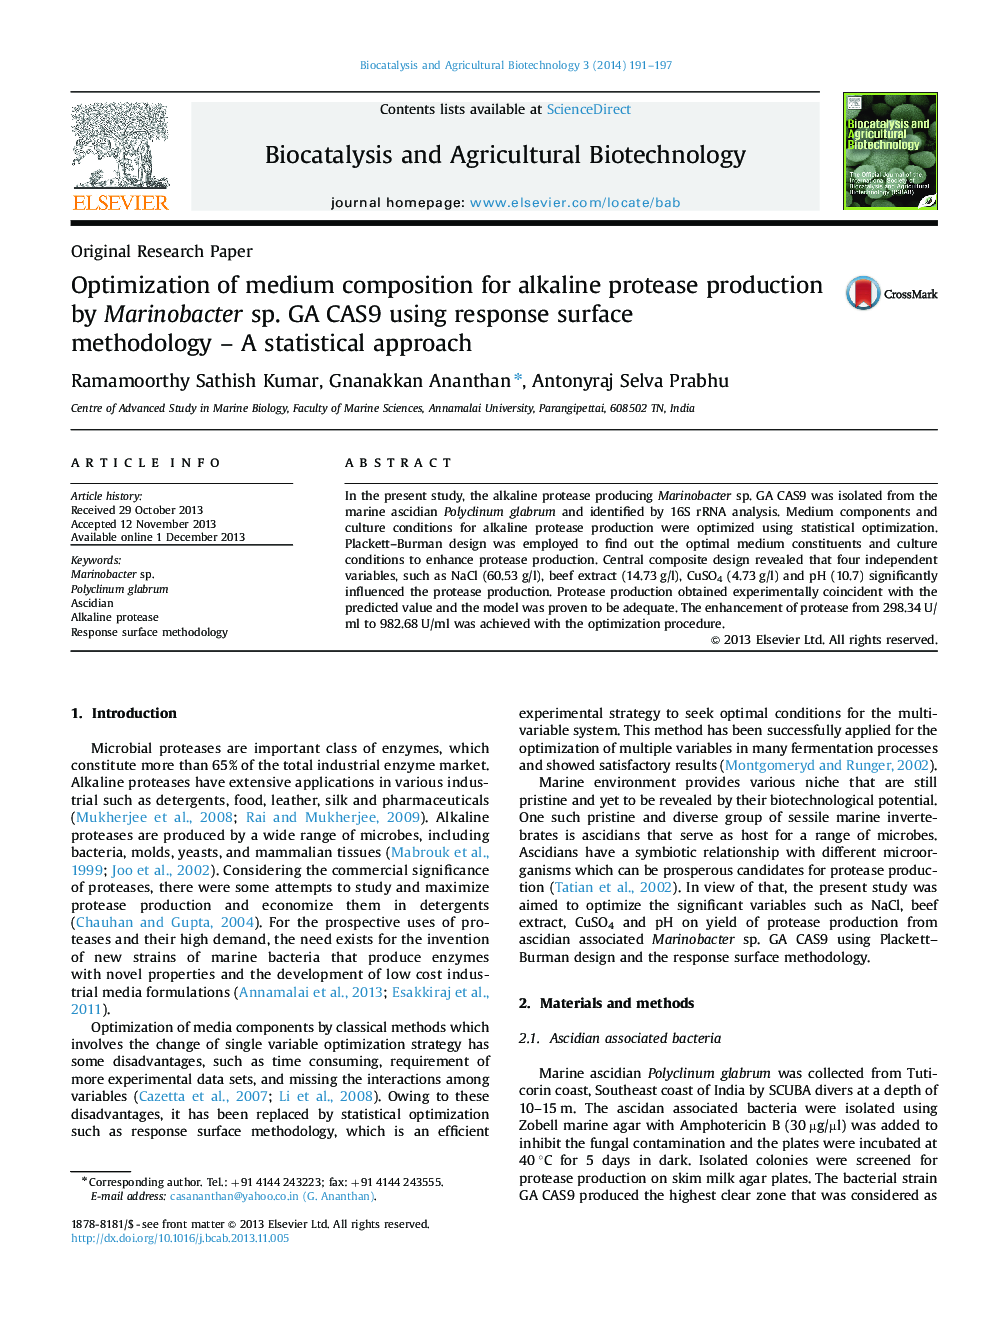 Optimization of medium composition for alkaline protease production by Marinobacter sp. GA CAS9 using response surface methodology – A statistical approach